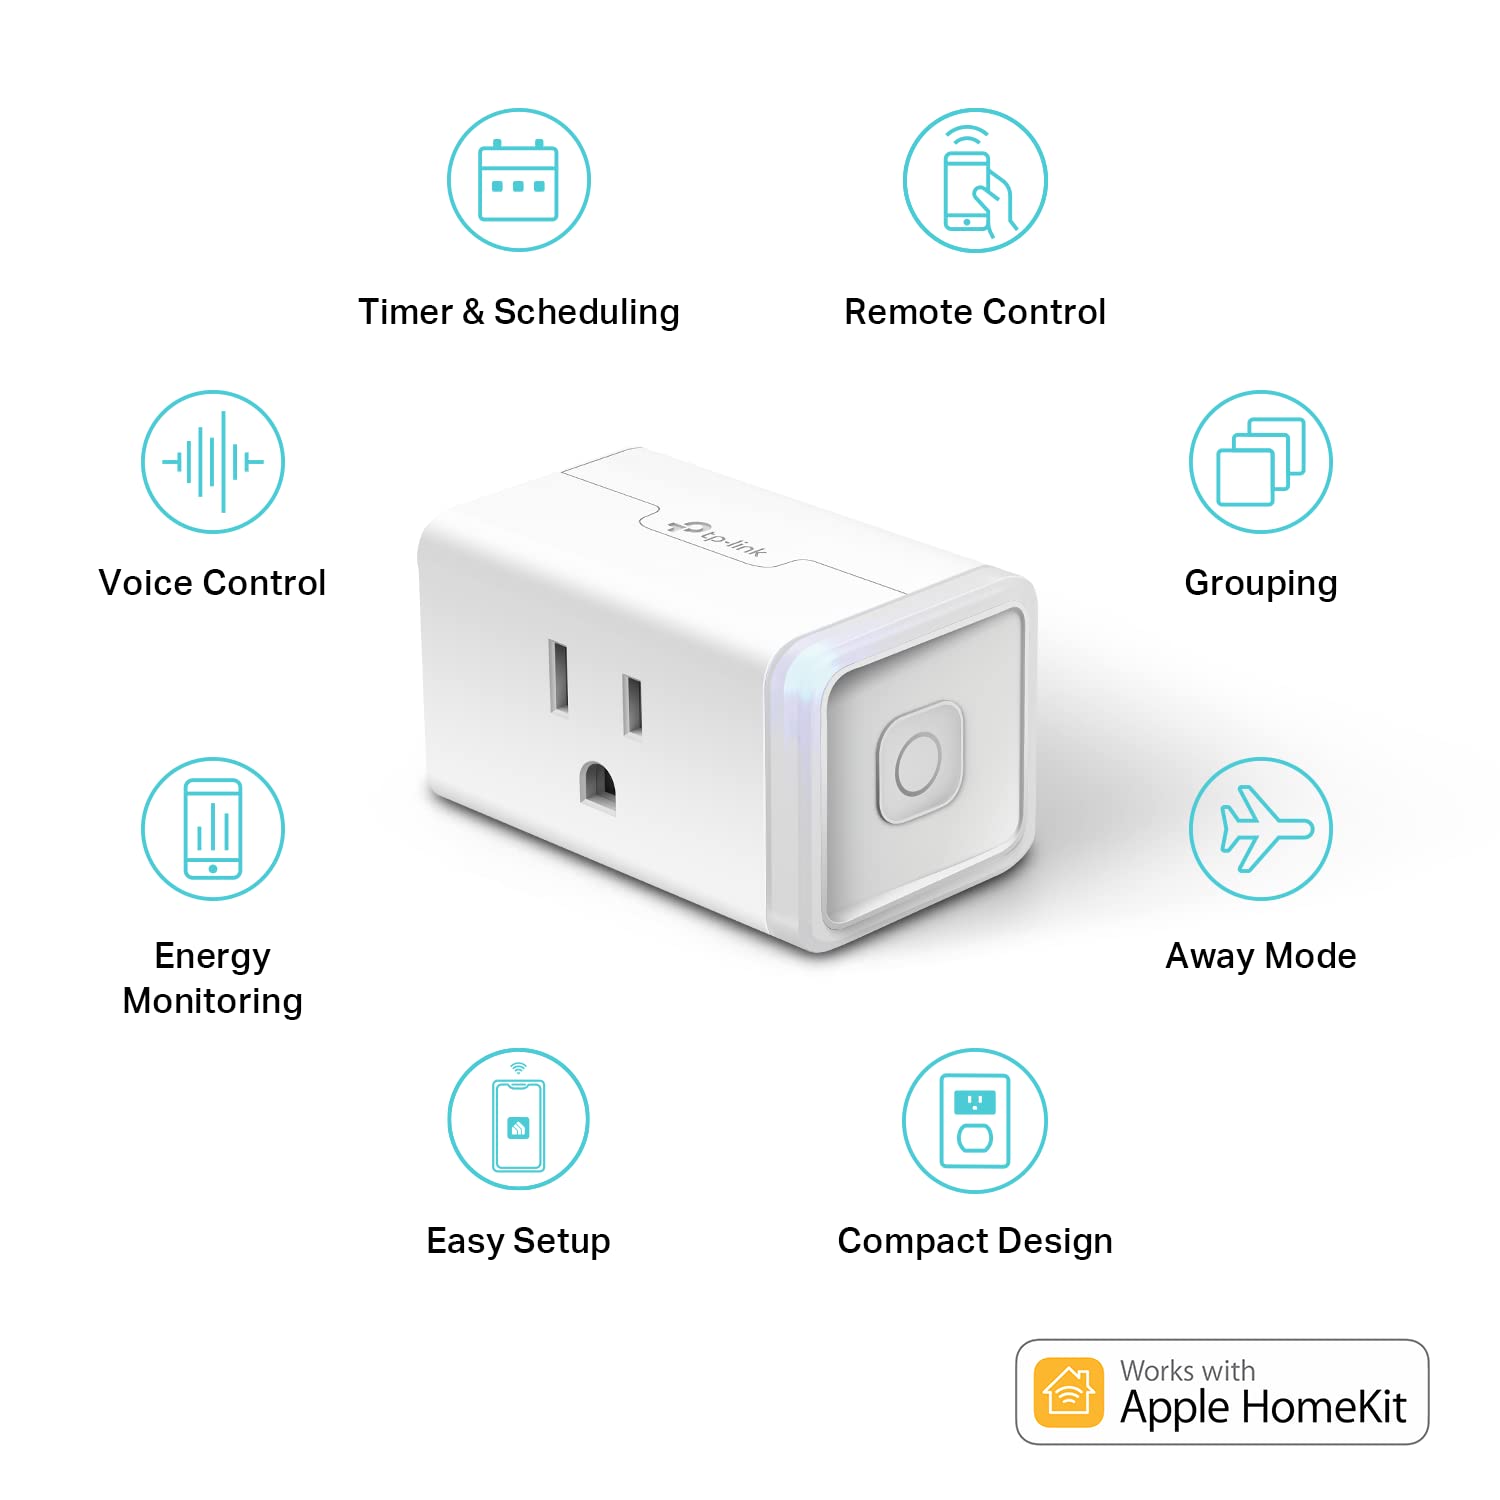 Kasa Smart Plug Mini 15A, Apple HomeKit Supported, Smart Outlet Works with Siri, Alexa & Google Home, UL Certified, App Control, Scheduling, Timer, 2.4G WiFi Only, 2-Pack (EP25P2), White